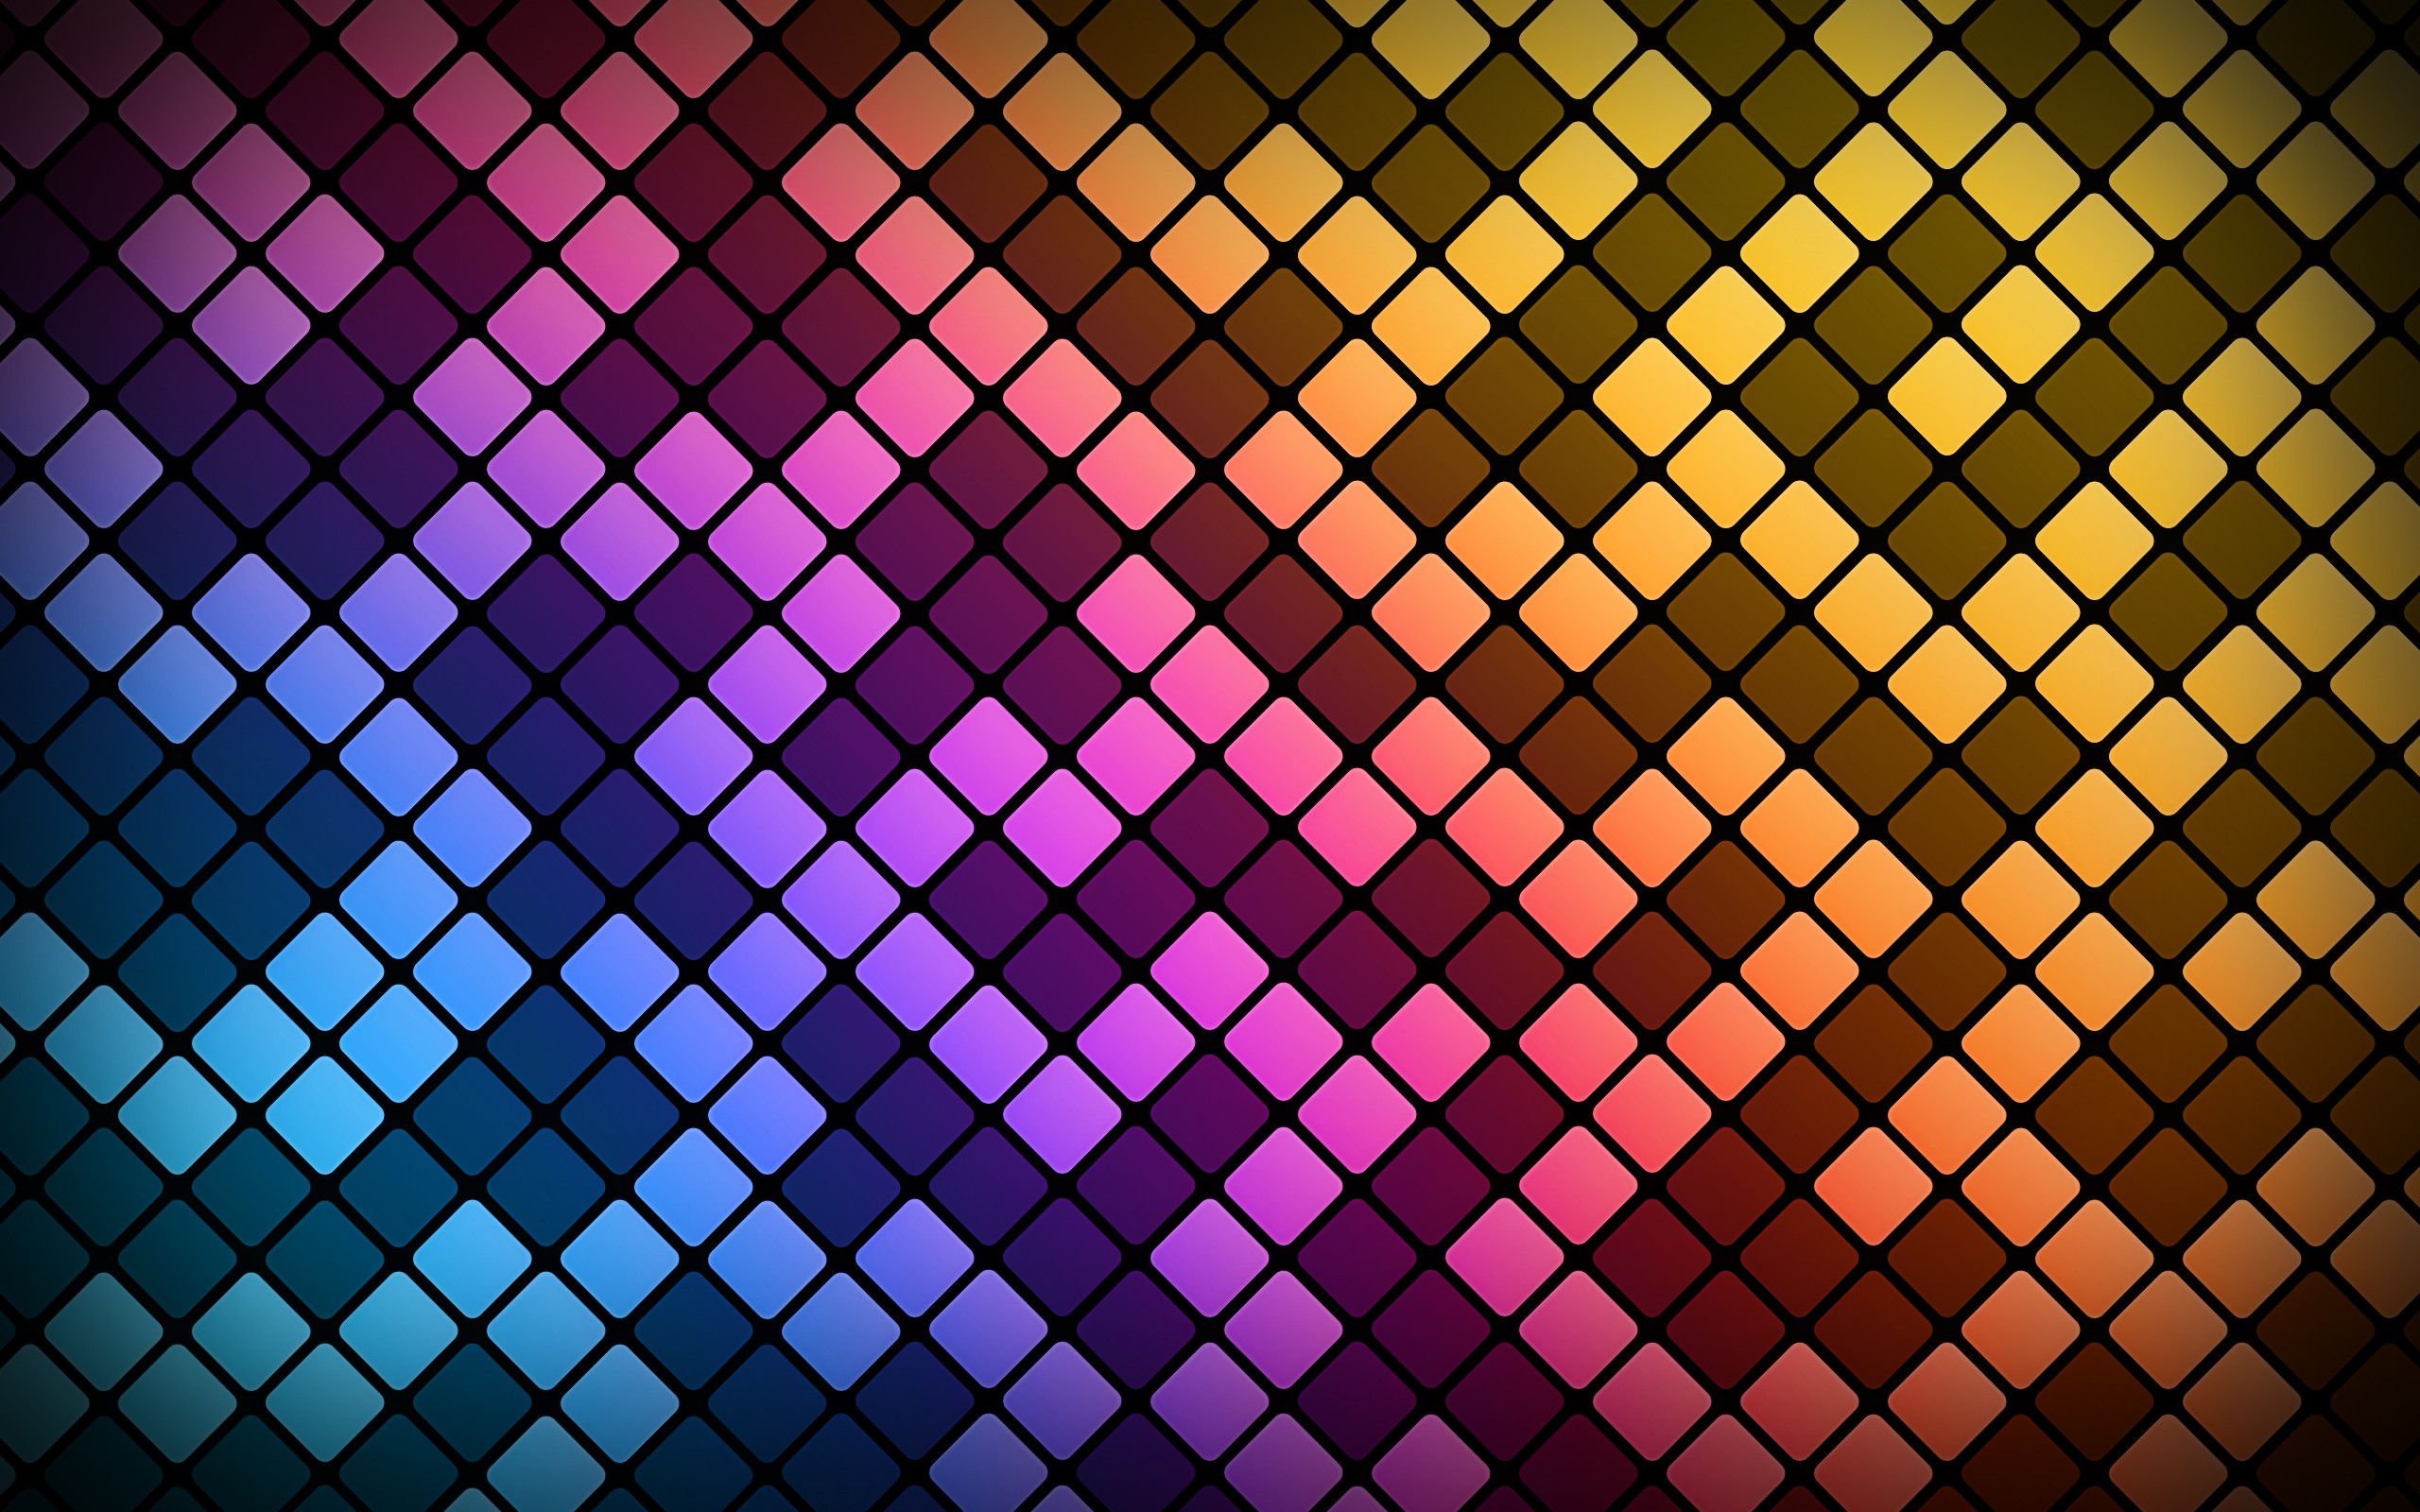 Collection of Cool Wallpaper Patterns on HDWallpapers